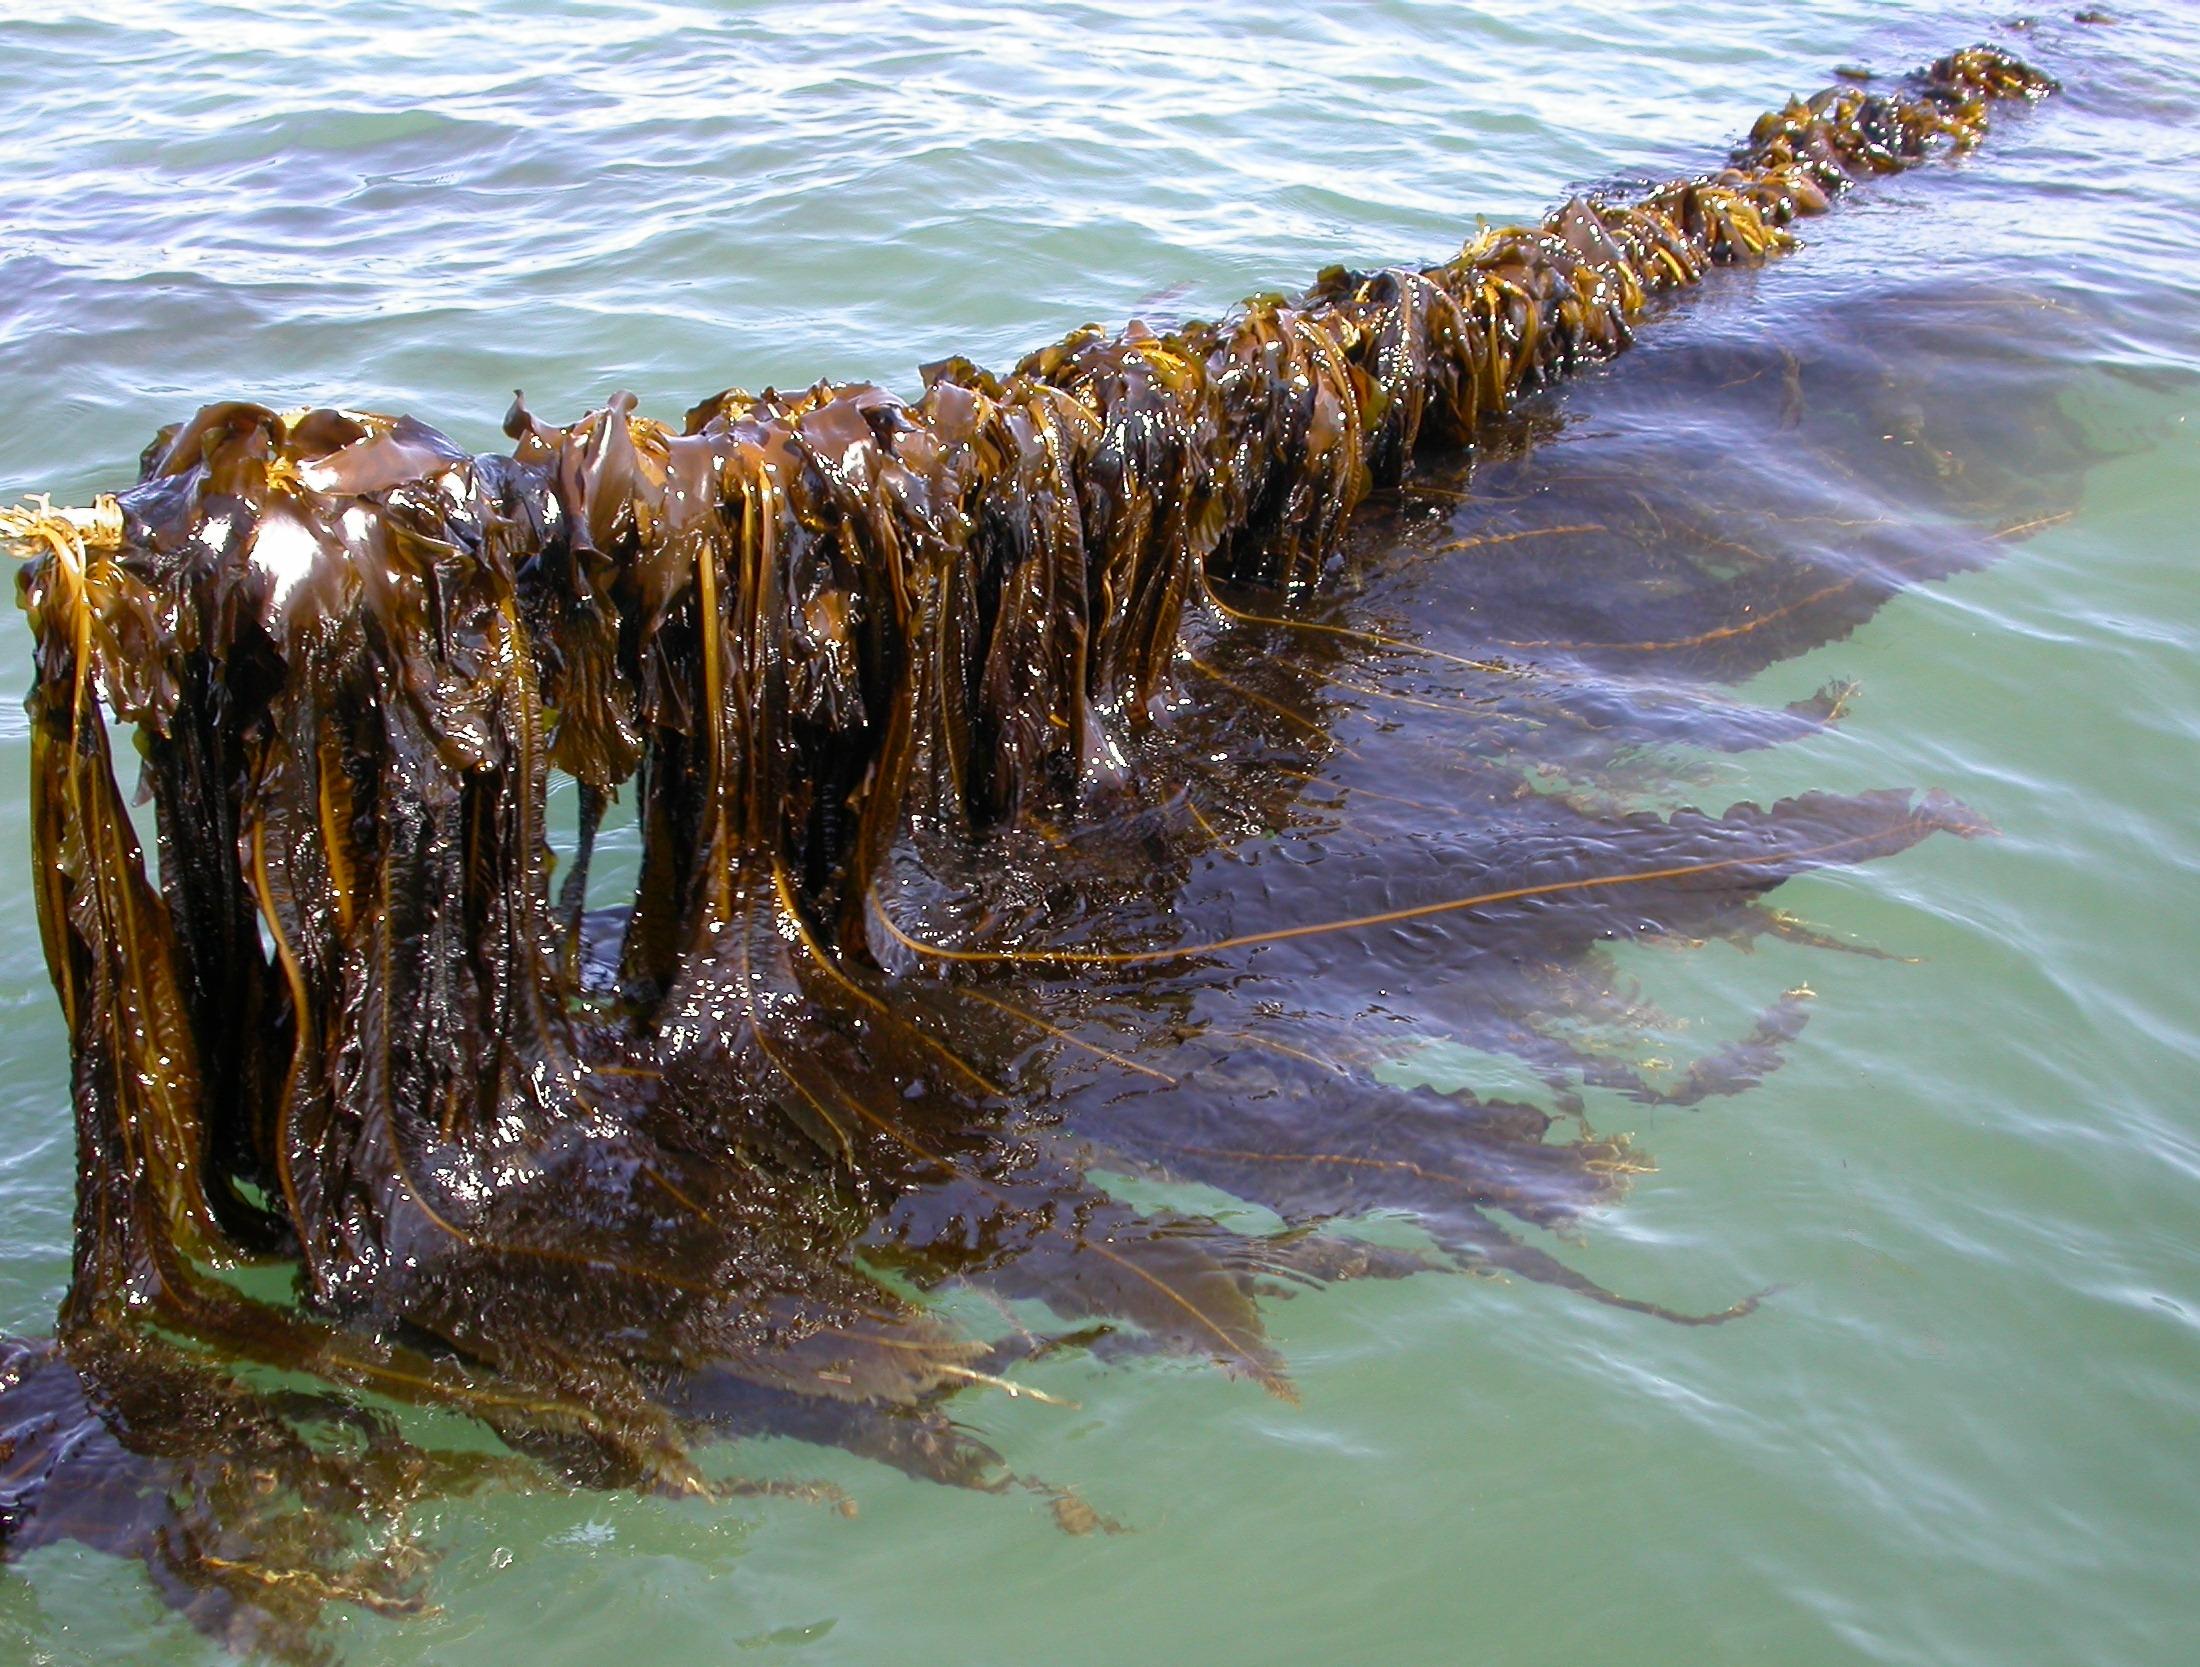 A line of the cultivated kelp, Alaria esculenta, at an IMTA site in the Bay of Fundy, NB